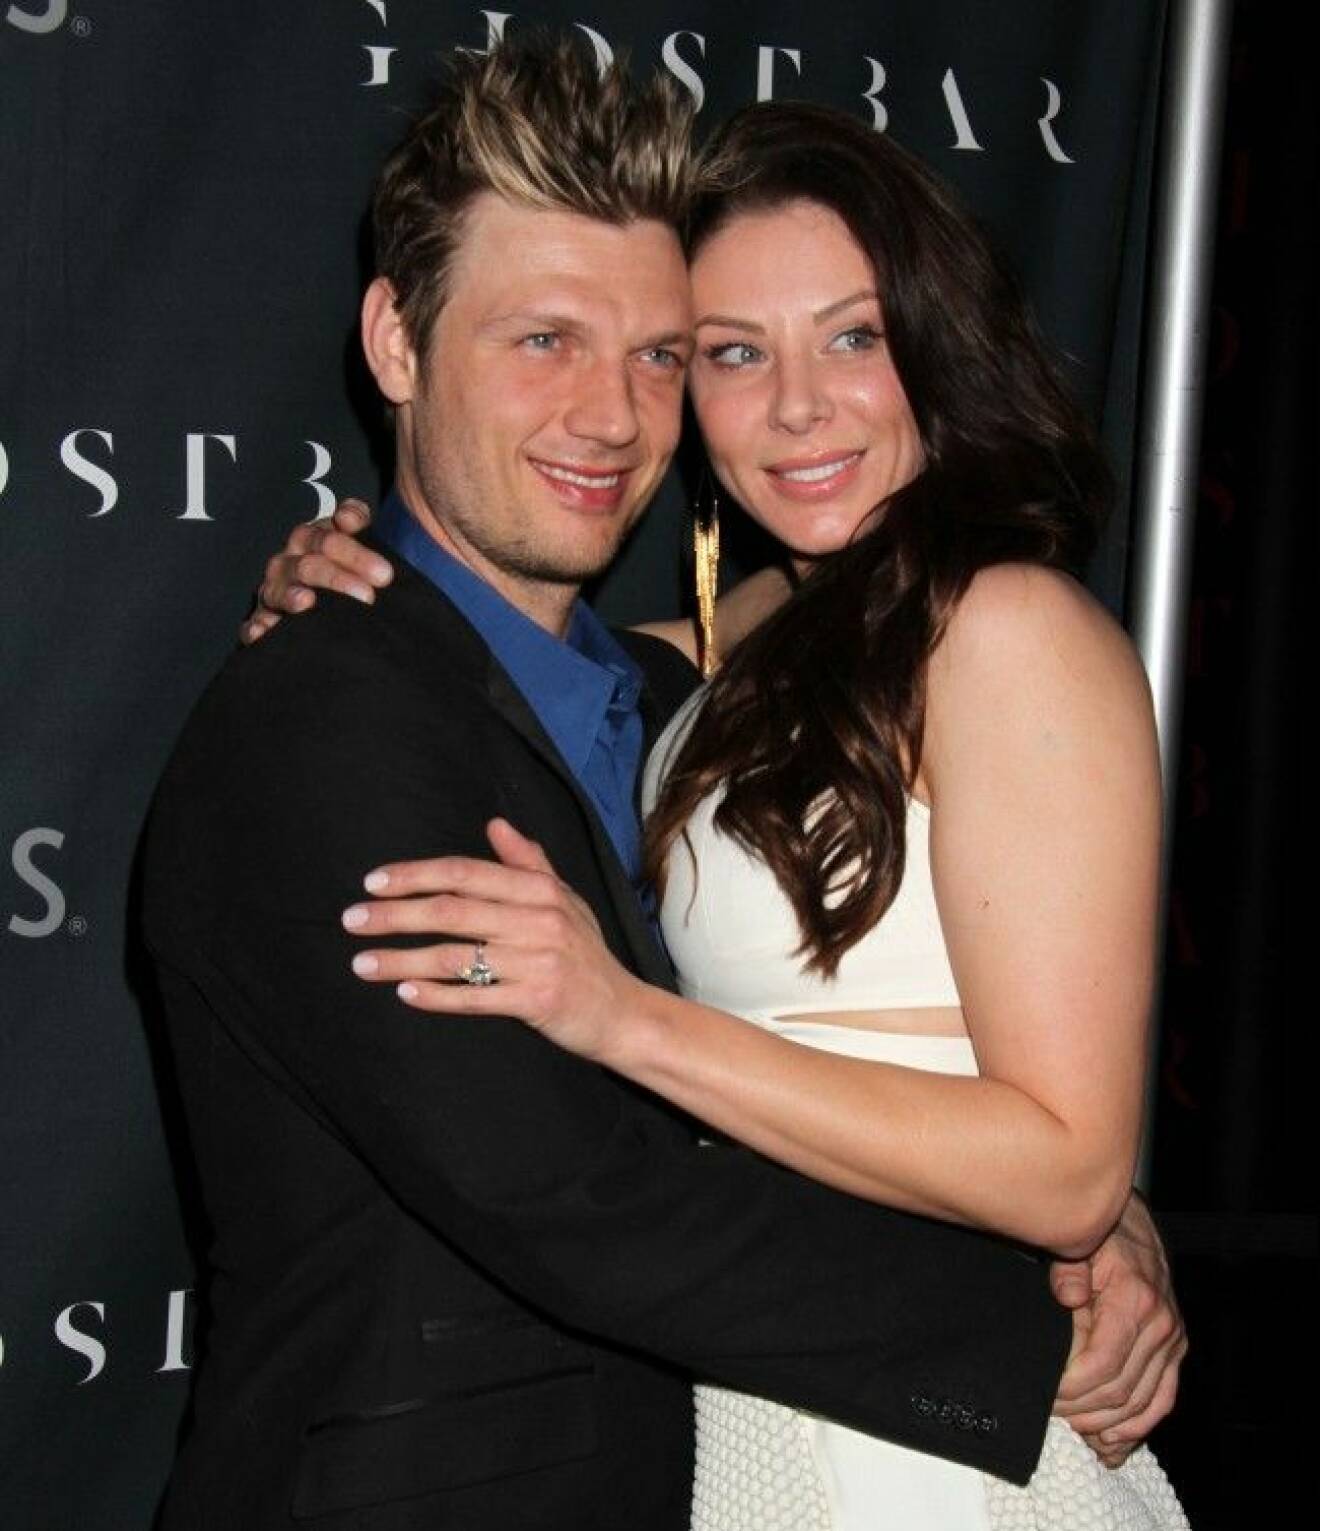 51325259 Singer Nick Carter of the Backstreet Boys and his fiancee Lauren Kitt arrive at their coed bachelor and bachelorette party at Ghostbar at the Palms Casino Resort on February 8, 2014 in Las Vegas, Nevada. FameFlynet, Inc - Beverly Hills, CA, USA - +1 (818) 307-4813 COPYRIGHT FAMEFLYNET